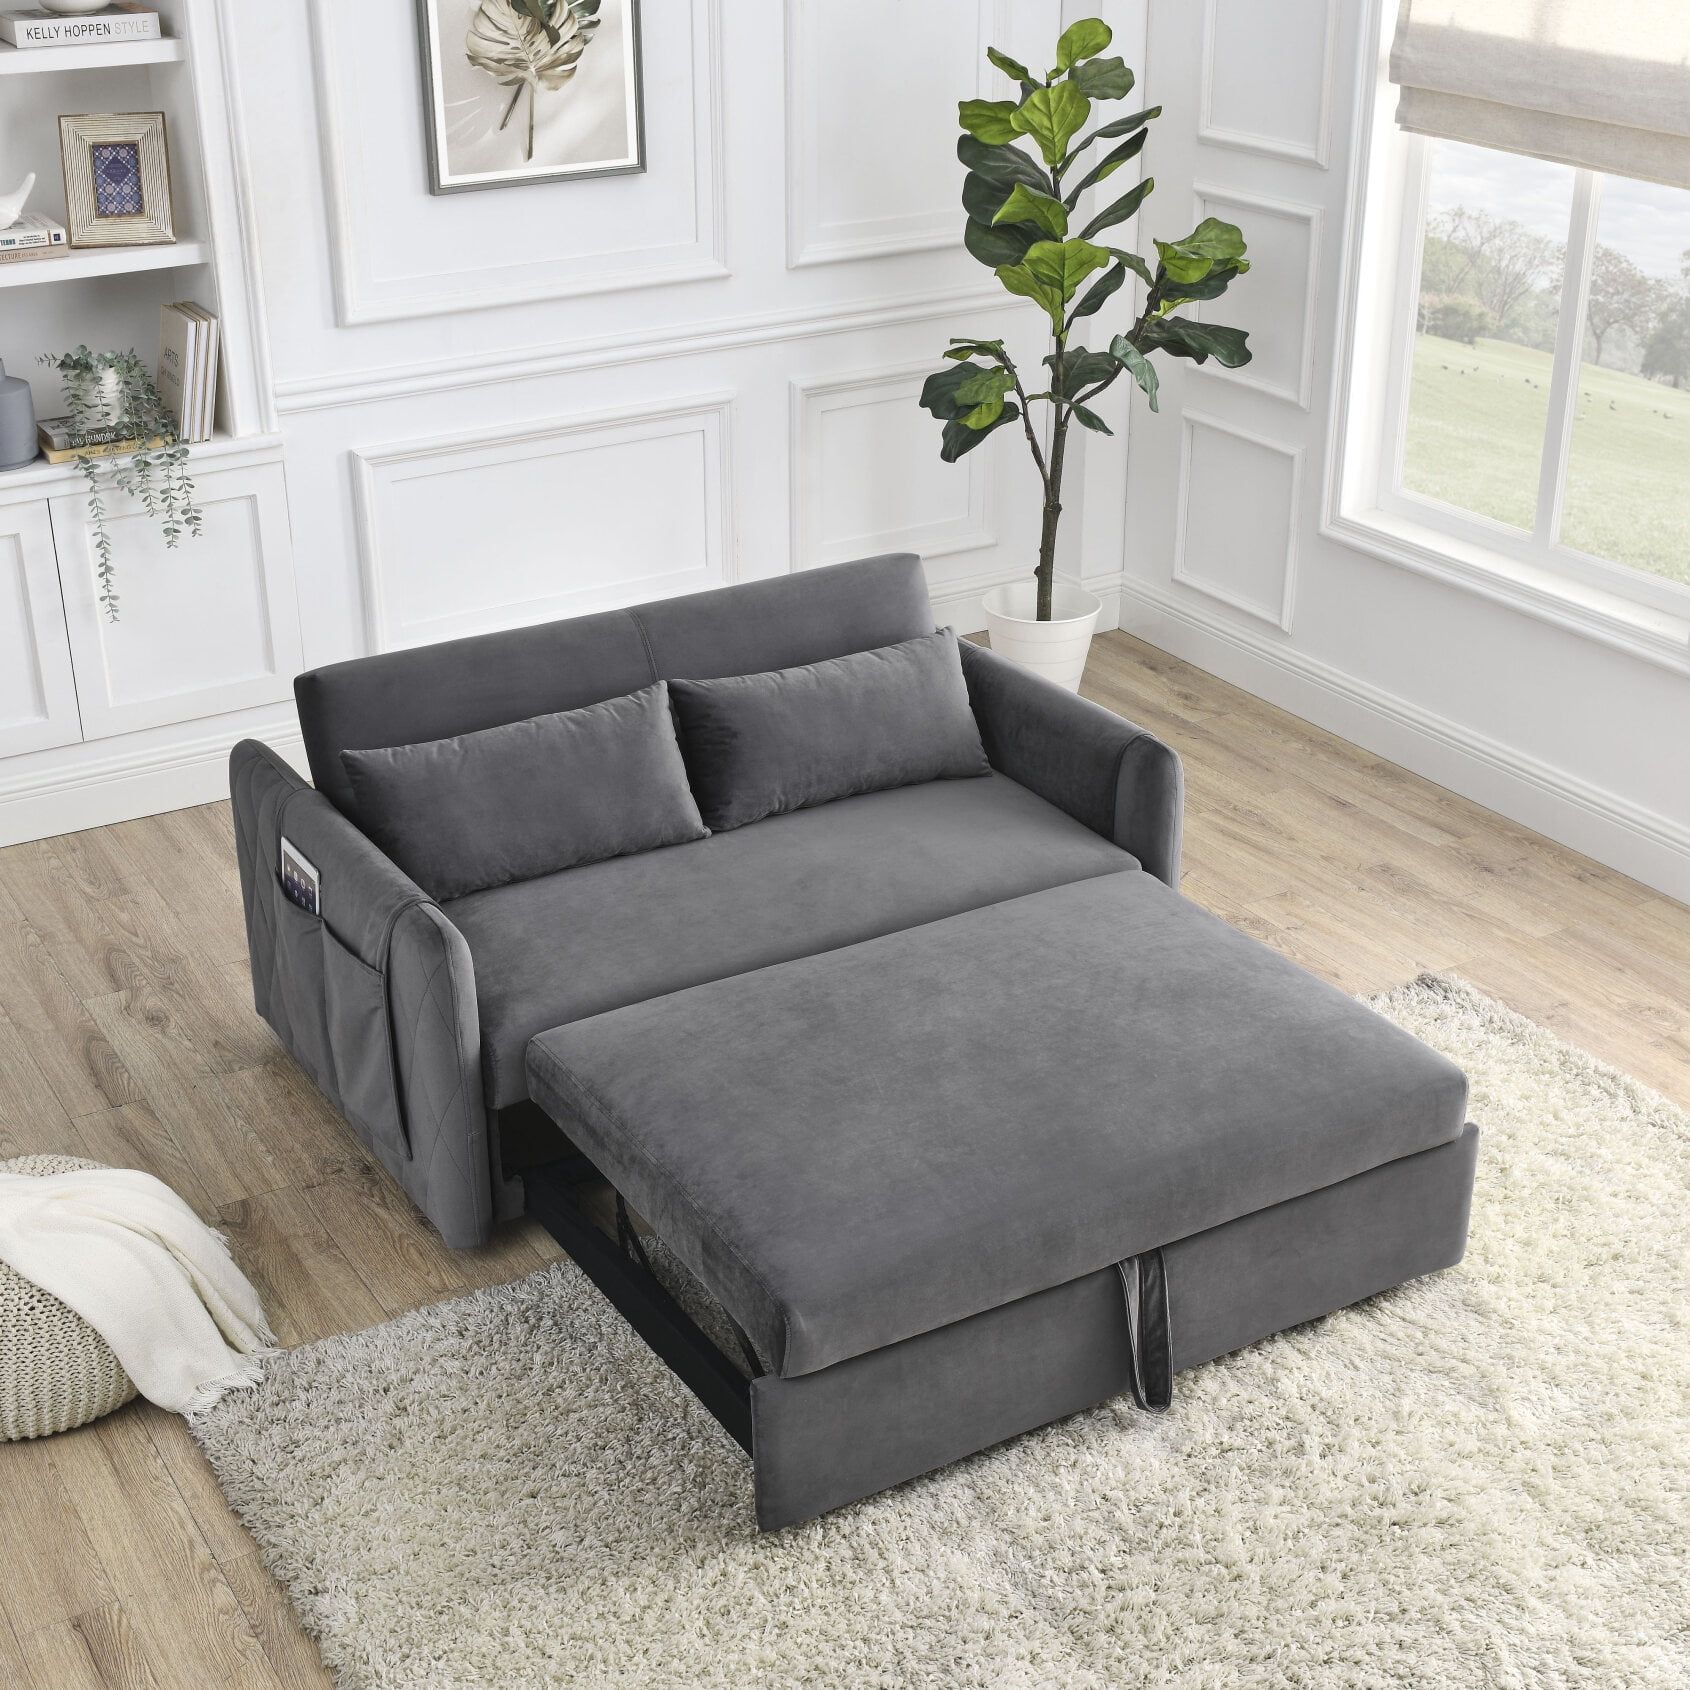 3 In 1 Convertible Sleeper Sofa Bed, Upholstered Pull Out Sofa With 2  Detachable Arm Pockets, Futon Sofa Bed With 2 Pillows And Adjustable  Backrest For Apartment Living Room – Walmart With Regard To 3 In 1 Gray Pull Out Sleeper Sofas (View 9 of 15)